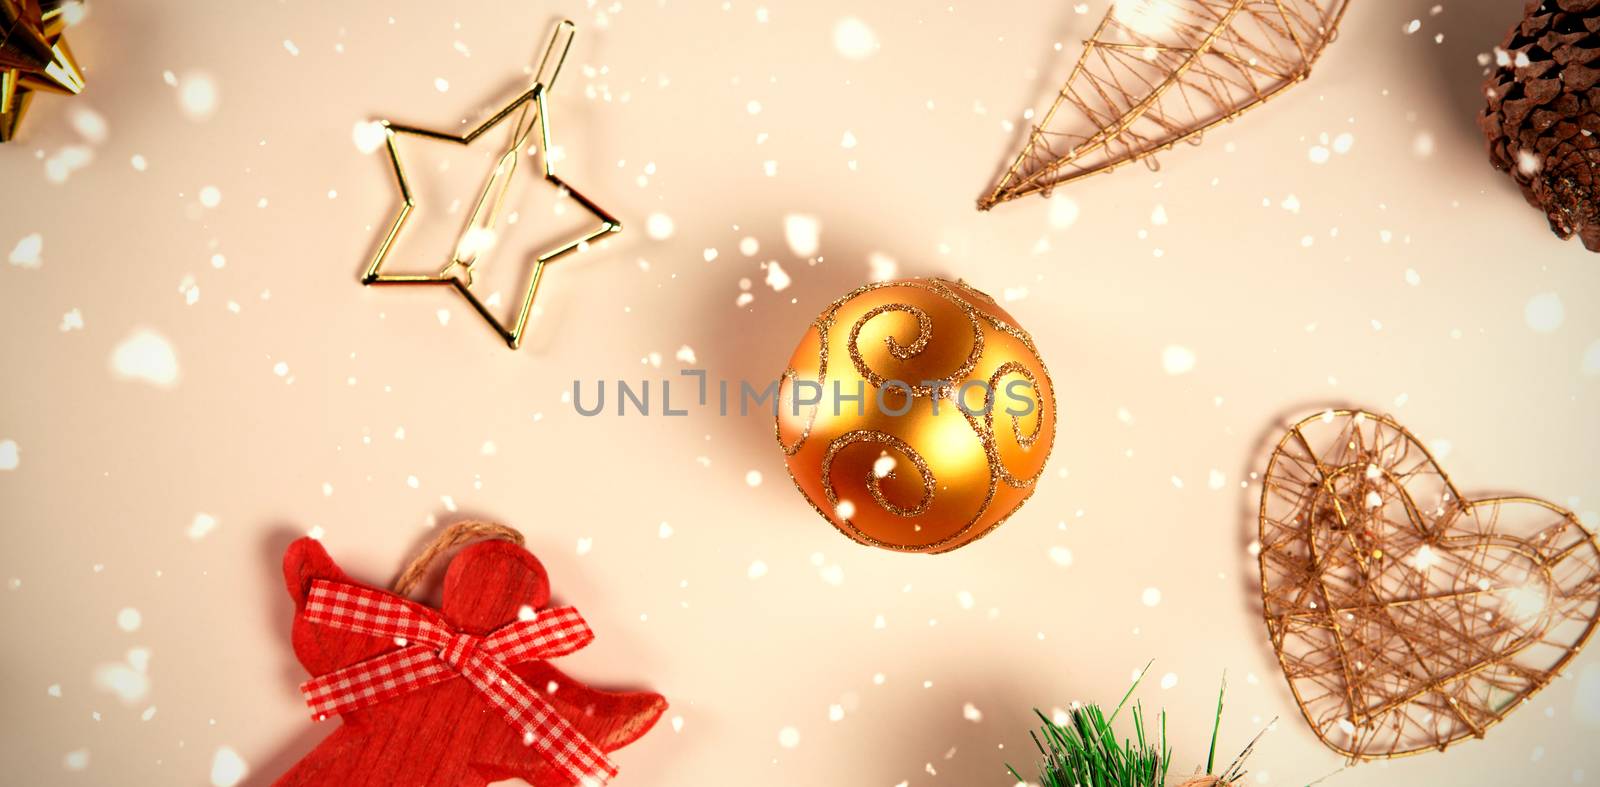 Snow falling against close-up on christmas decorations